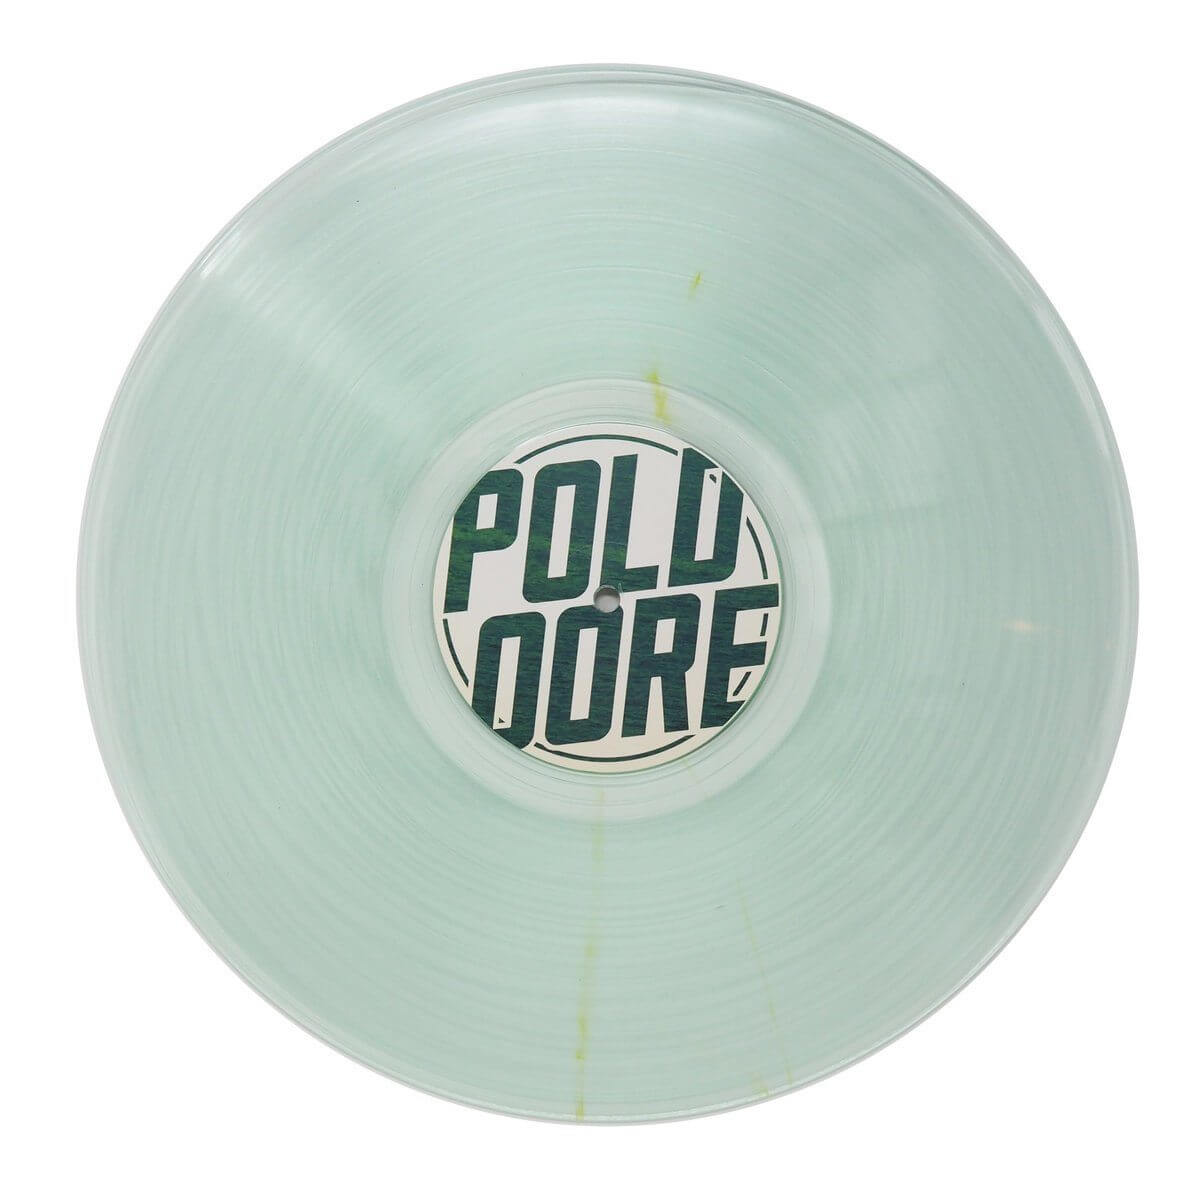 Poldoore - The Day Off - Limited Edition Green Colored 12 Inch Vinyl - Cold Busted